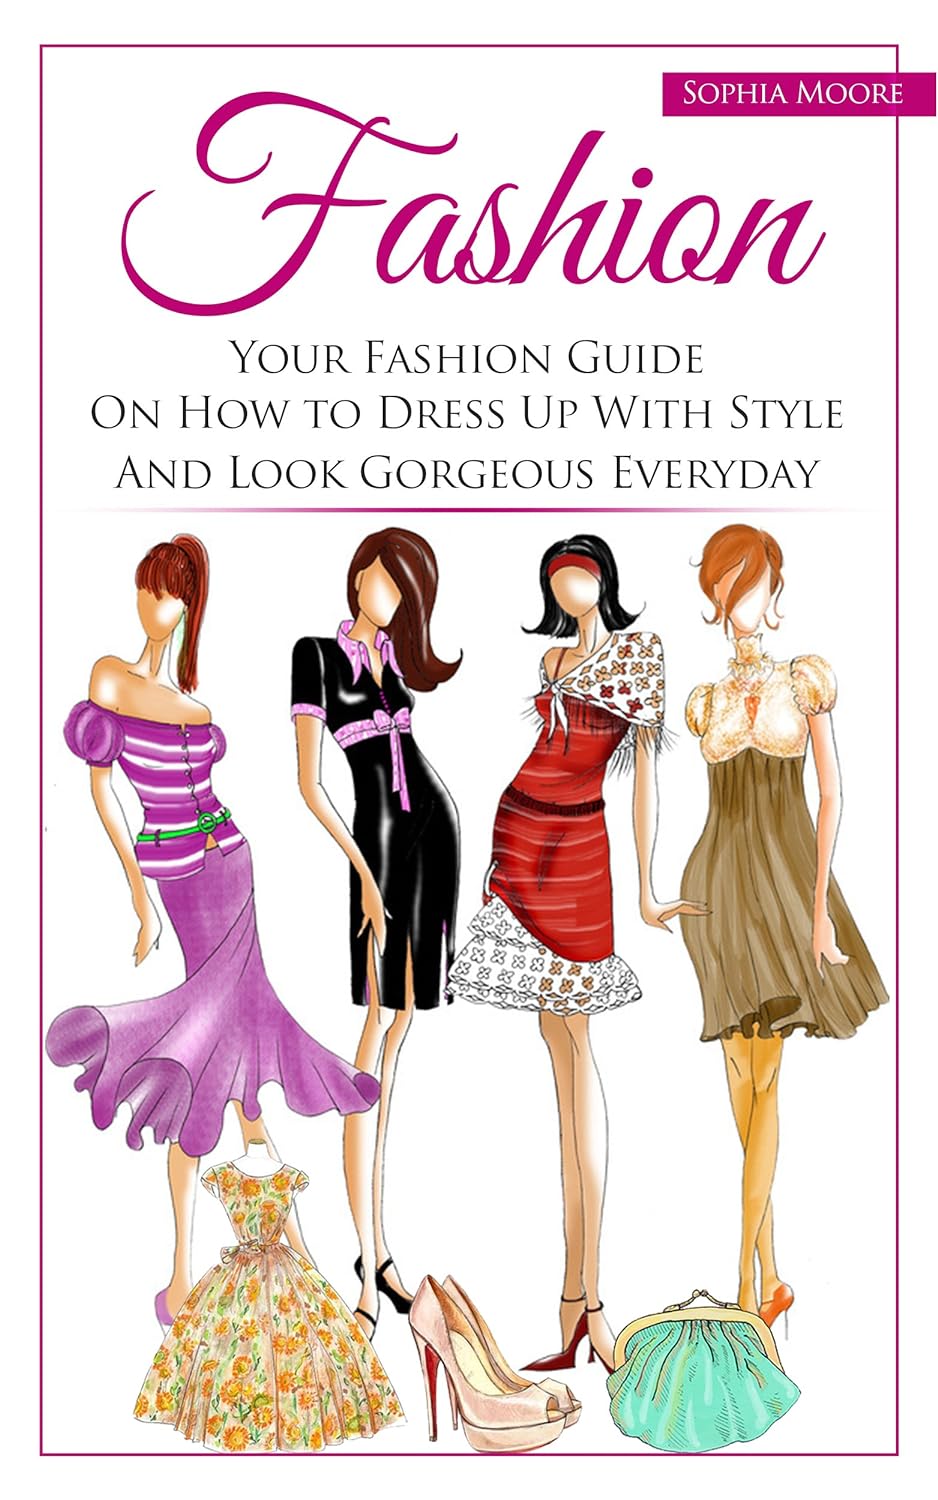 Fashion: Your Fashion Guide on How to Dress Up With Style and Look Gorgeous Everyday     Kindle Edition